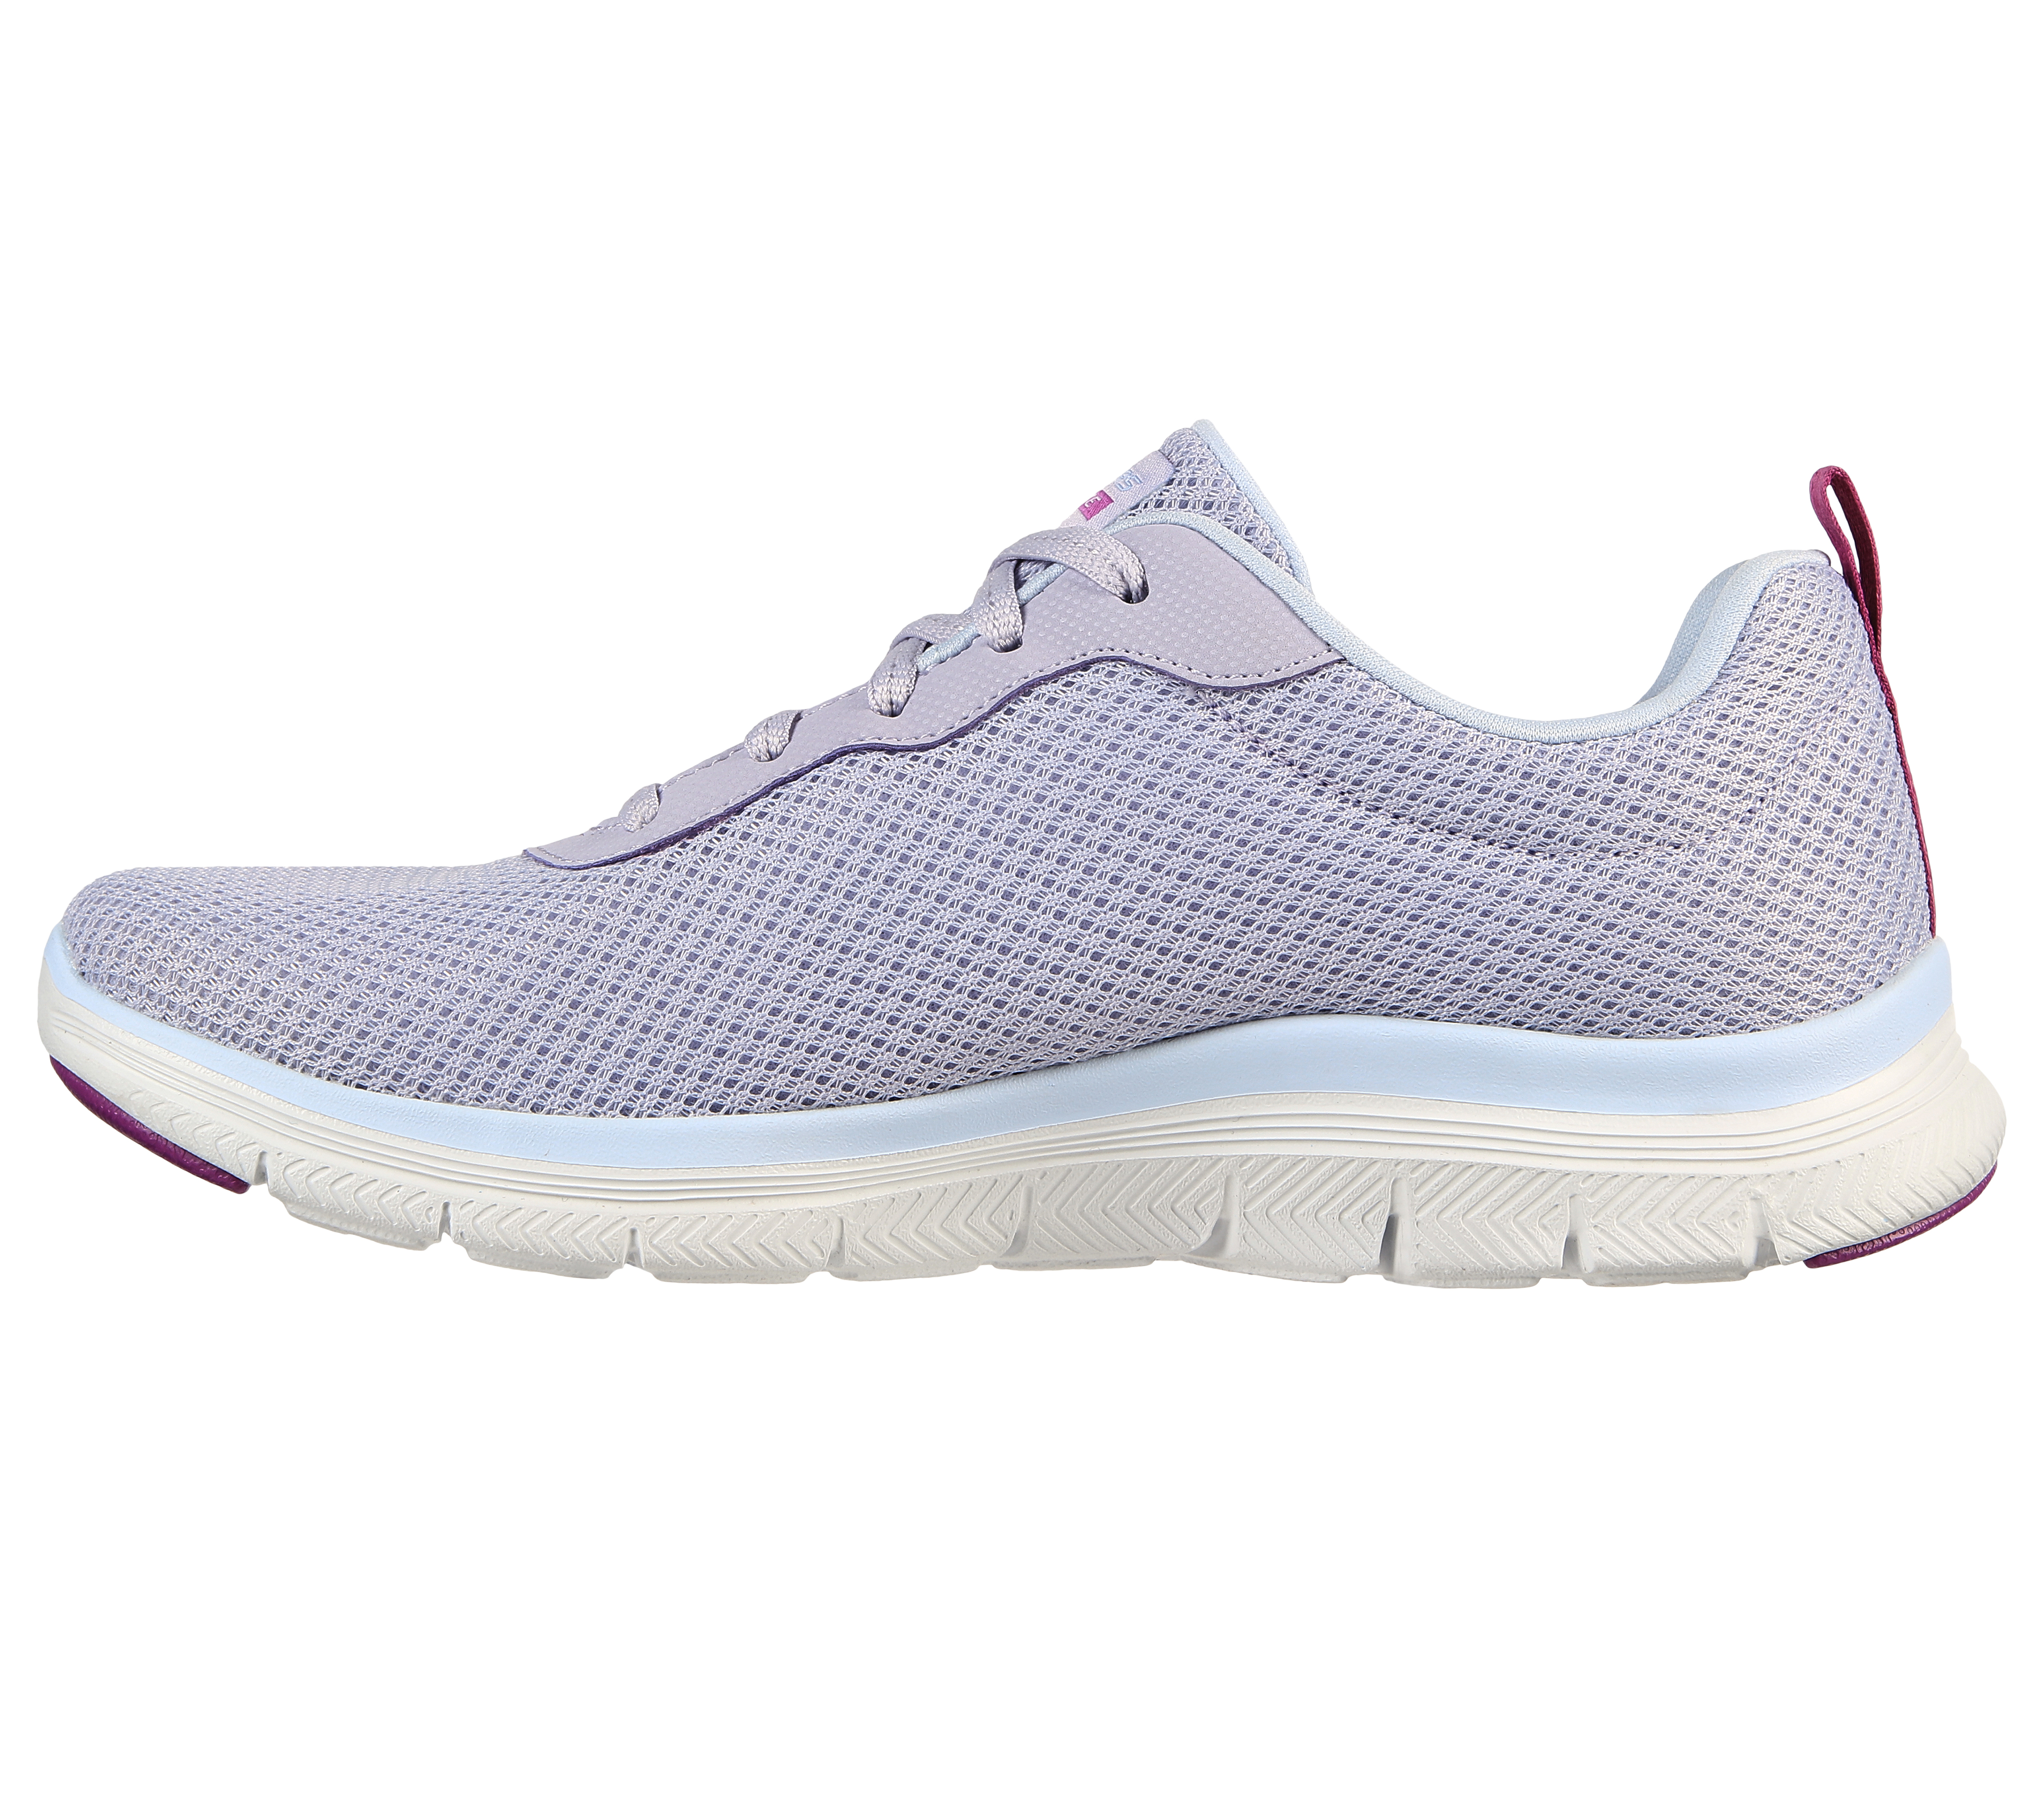 Skechers Flex Appeal 4.0 WTRG White Rose gold Womens trainers 149303